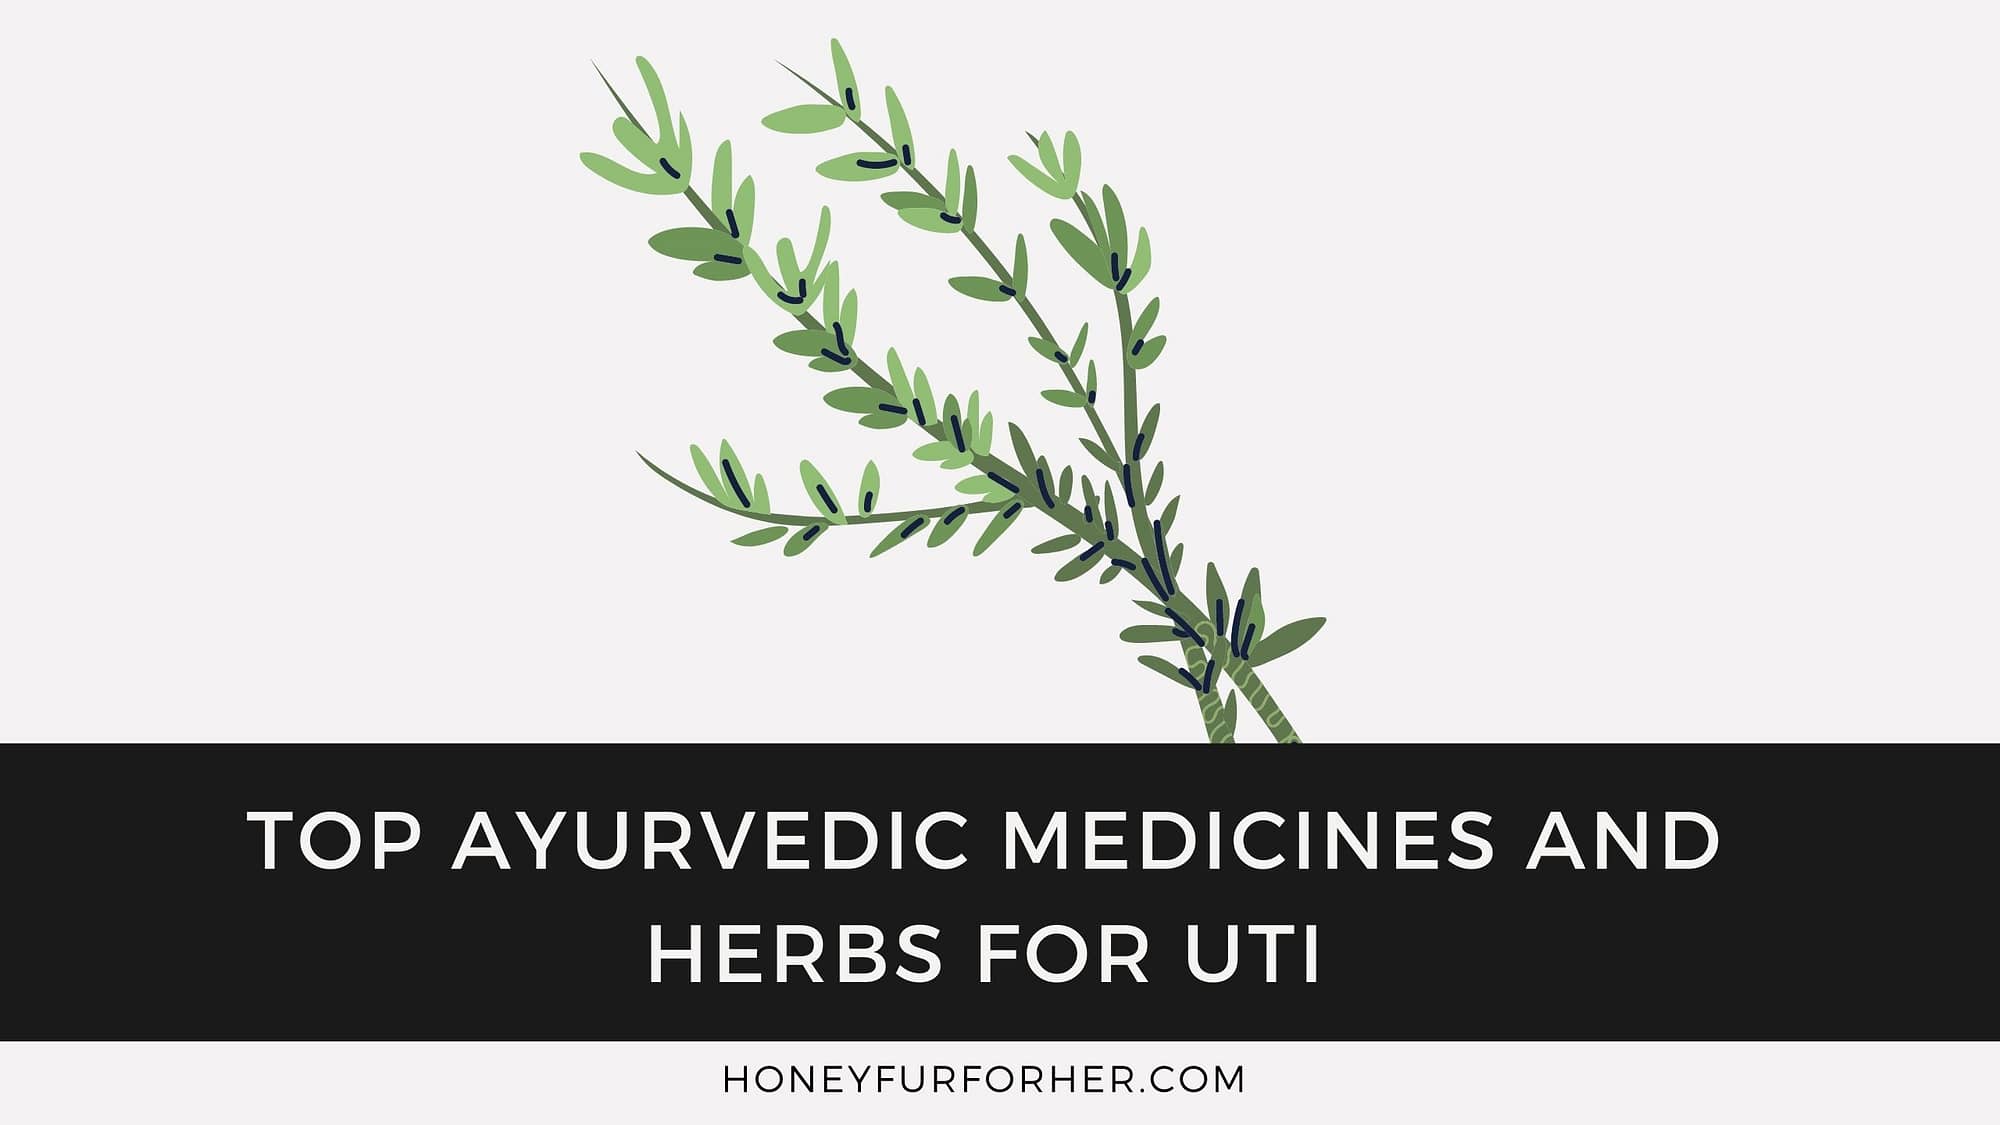 Ayurvedic Medicines And Herbs For UTI Feature Image